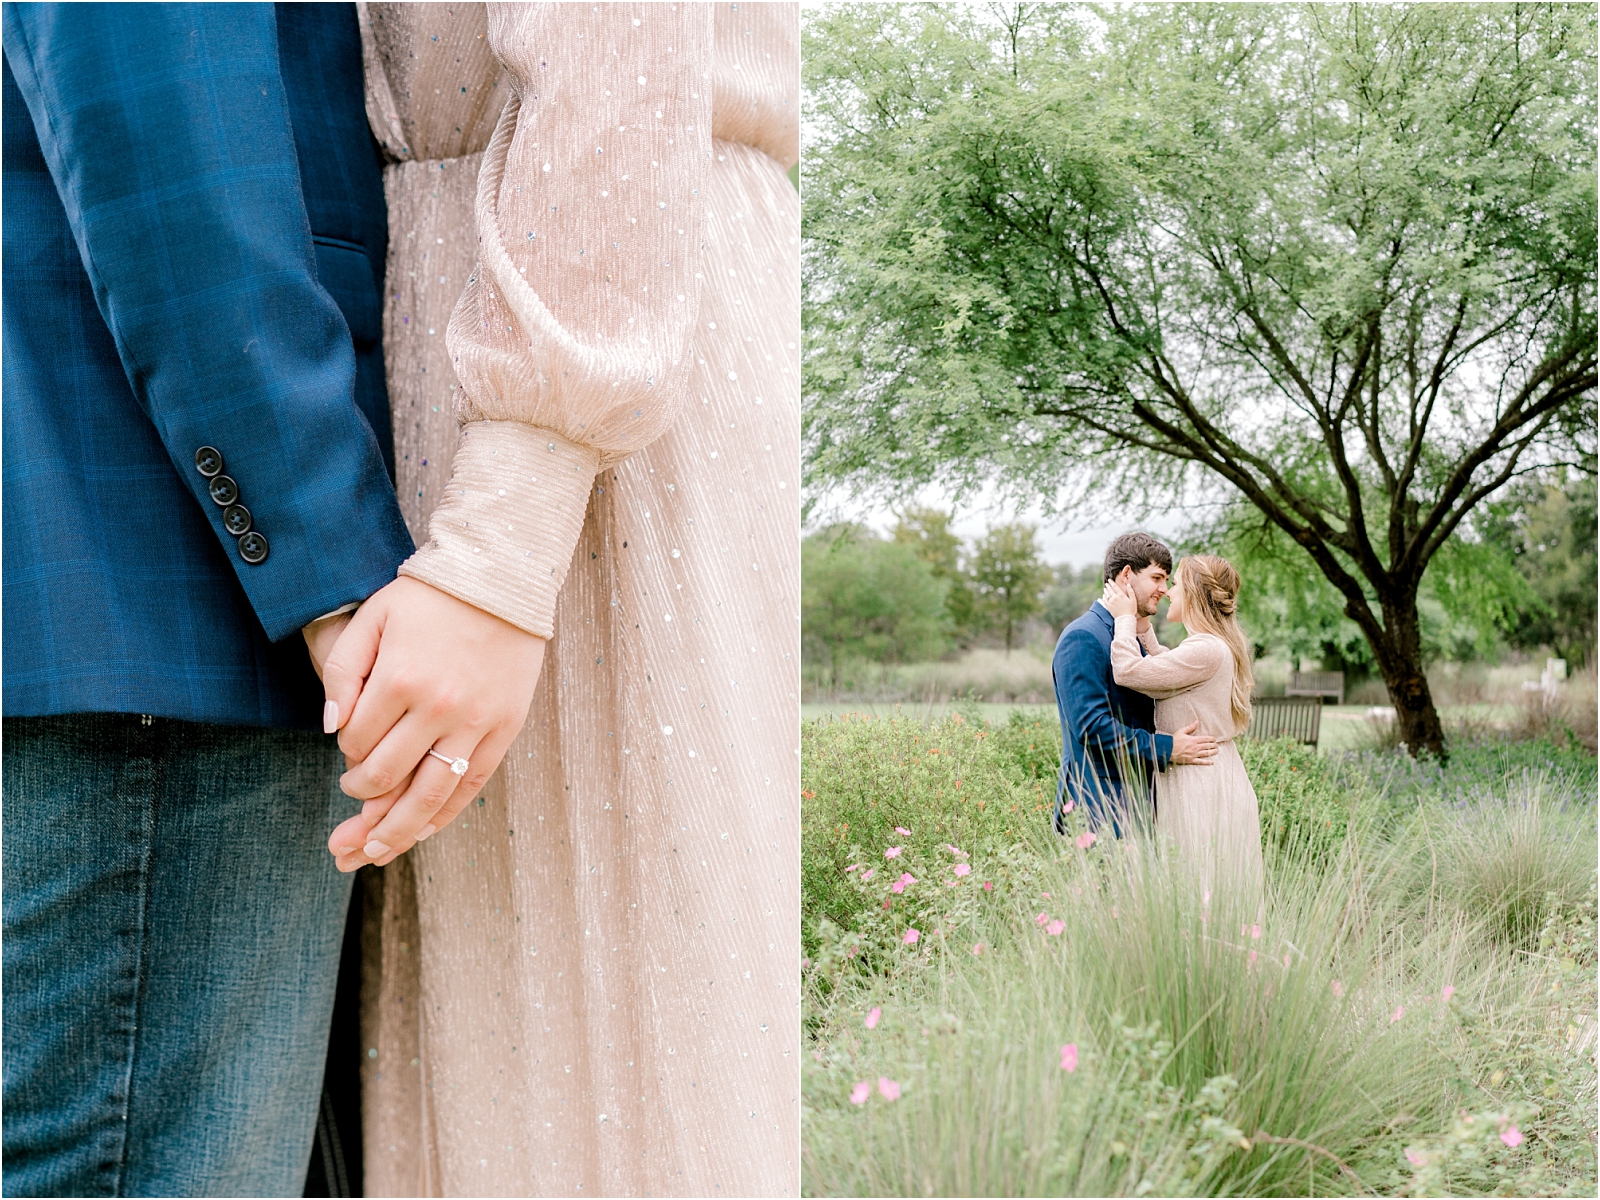 Engagement session at Lady Bird Johnson Wildflower Center